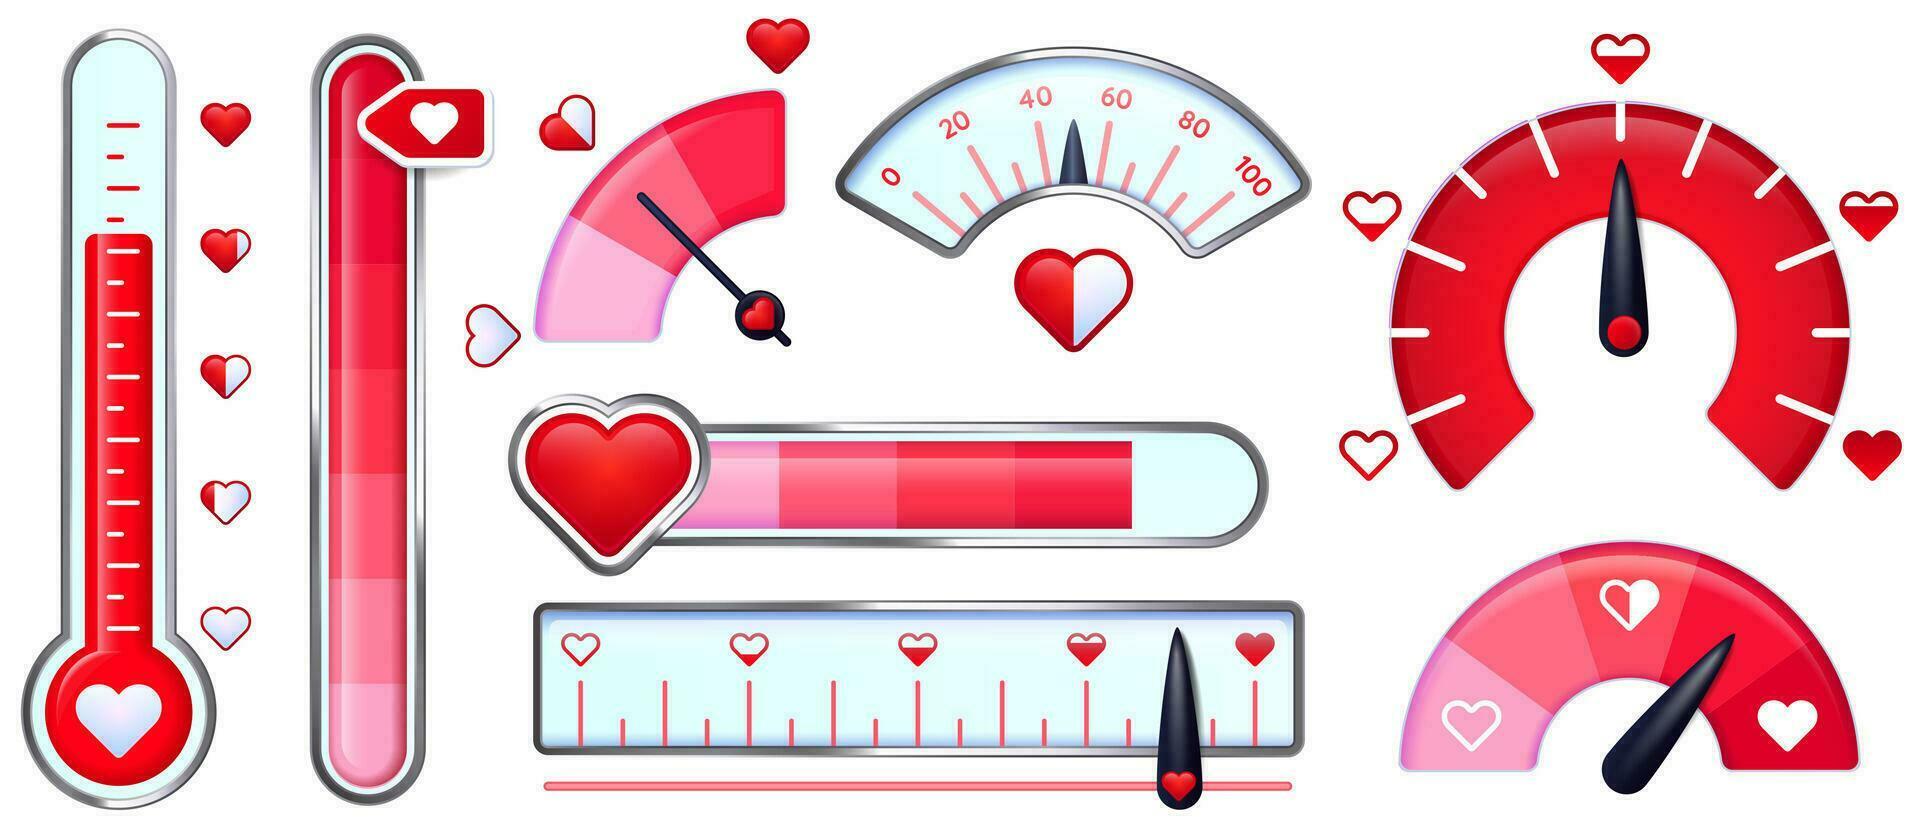 Love meter. Valentines Day card, love indicator with red hearts and love thermometer. Red heart meters vector set